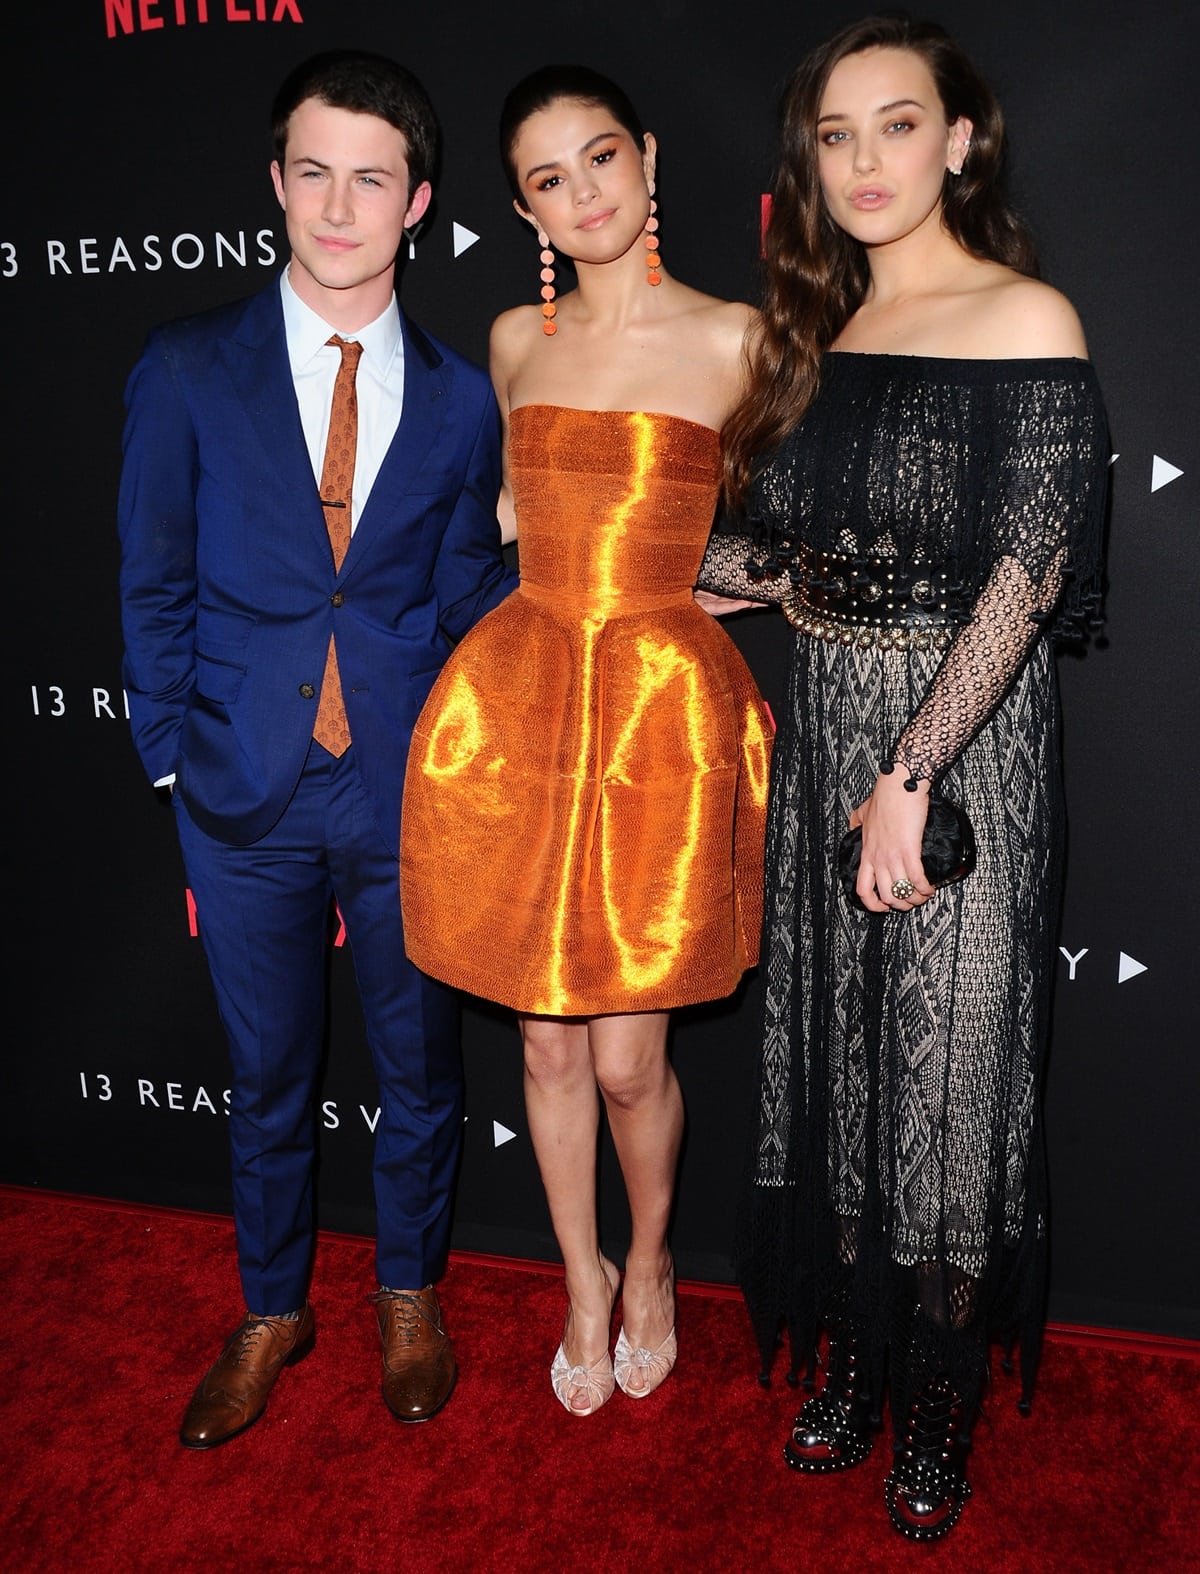 Actors Dylan Minnette, Selena Gomez and Katherine Langford attend the Premiere of Netflix's "13 Reasons Why"